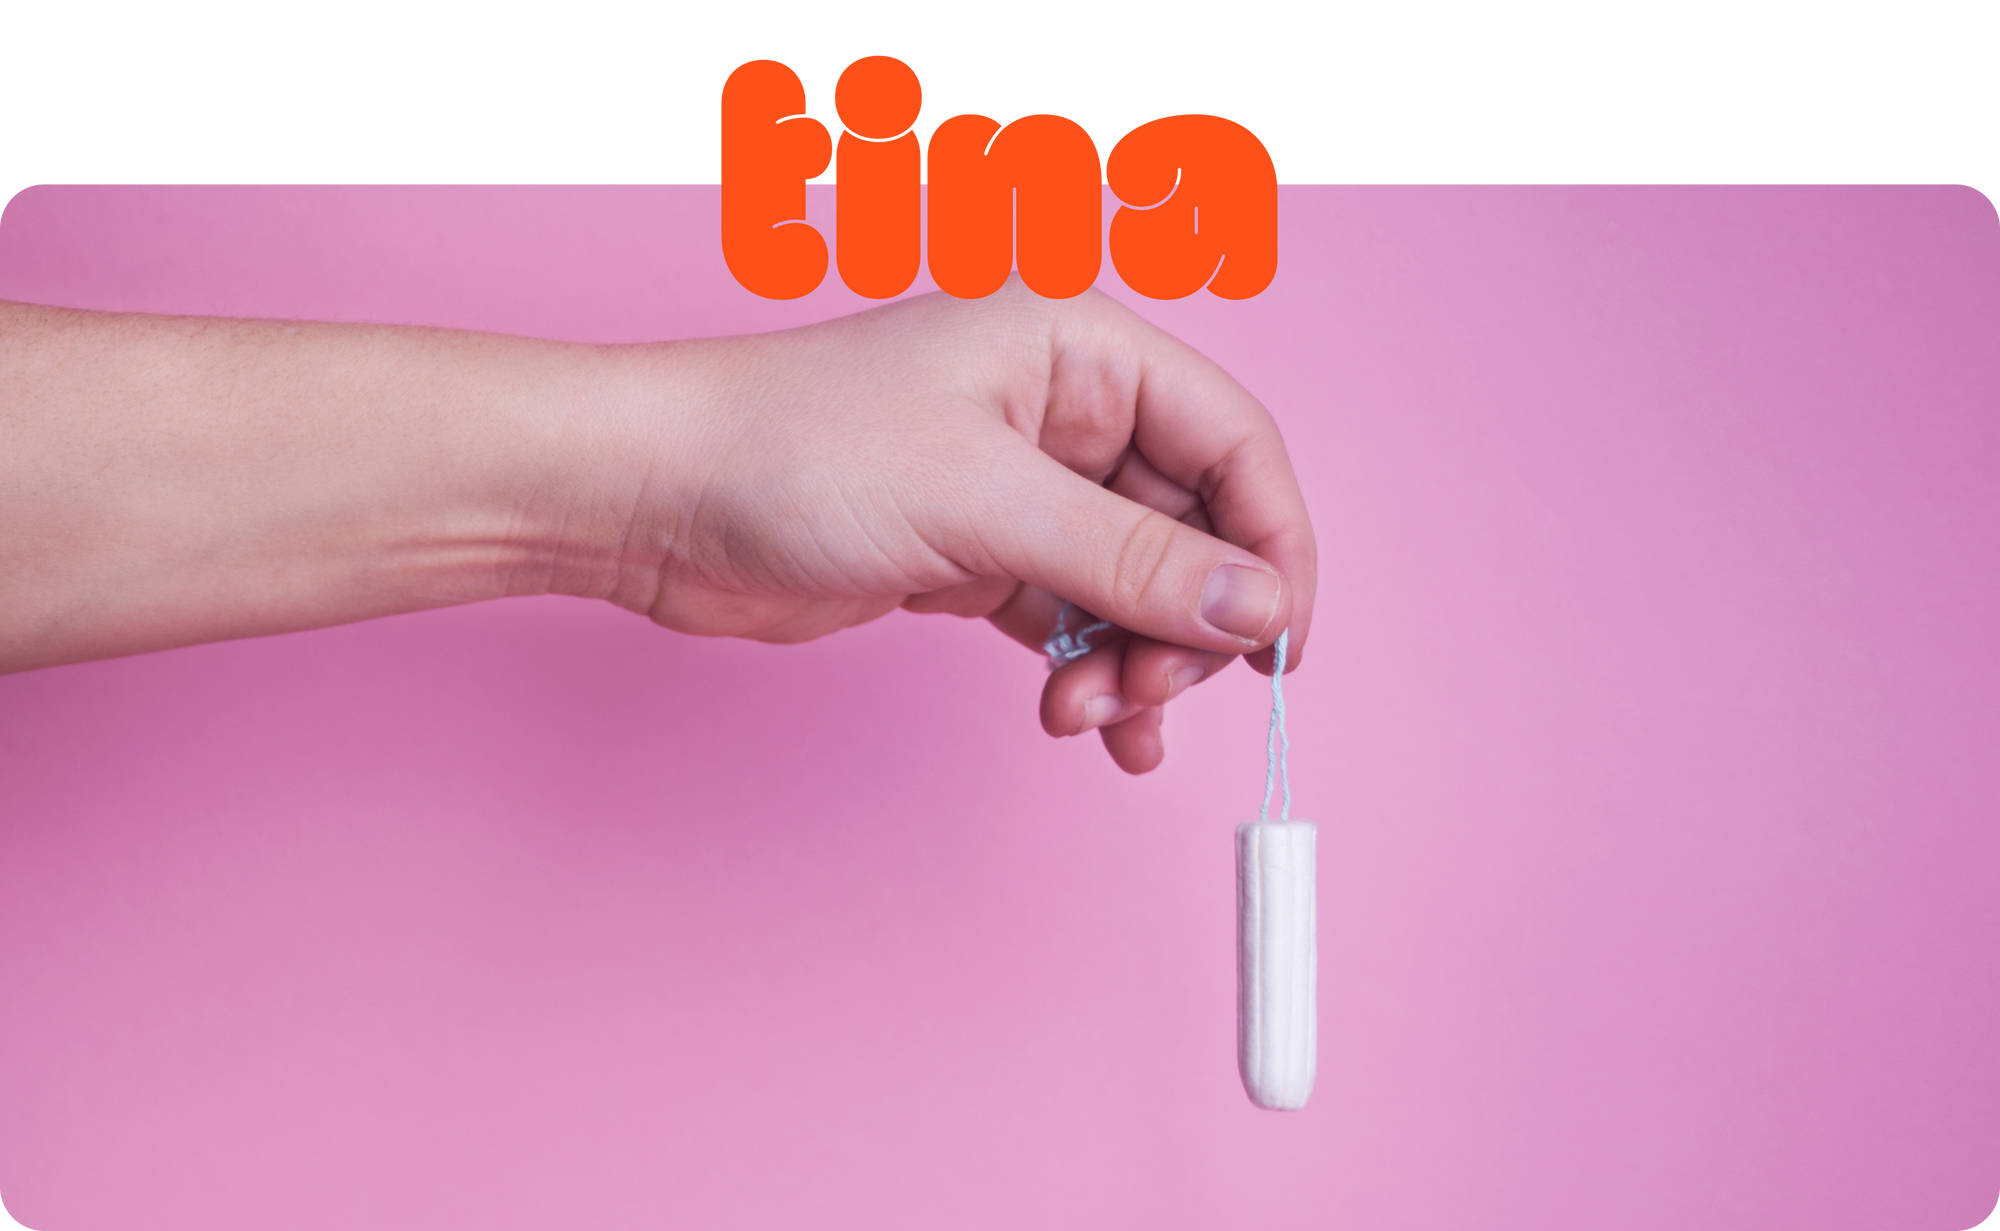 Hand holding a tampon against a pink background. The orange Tina Healthcare logo is centered at the top.